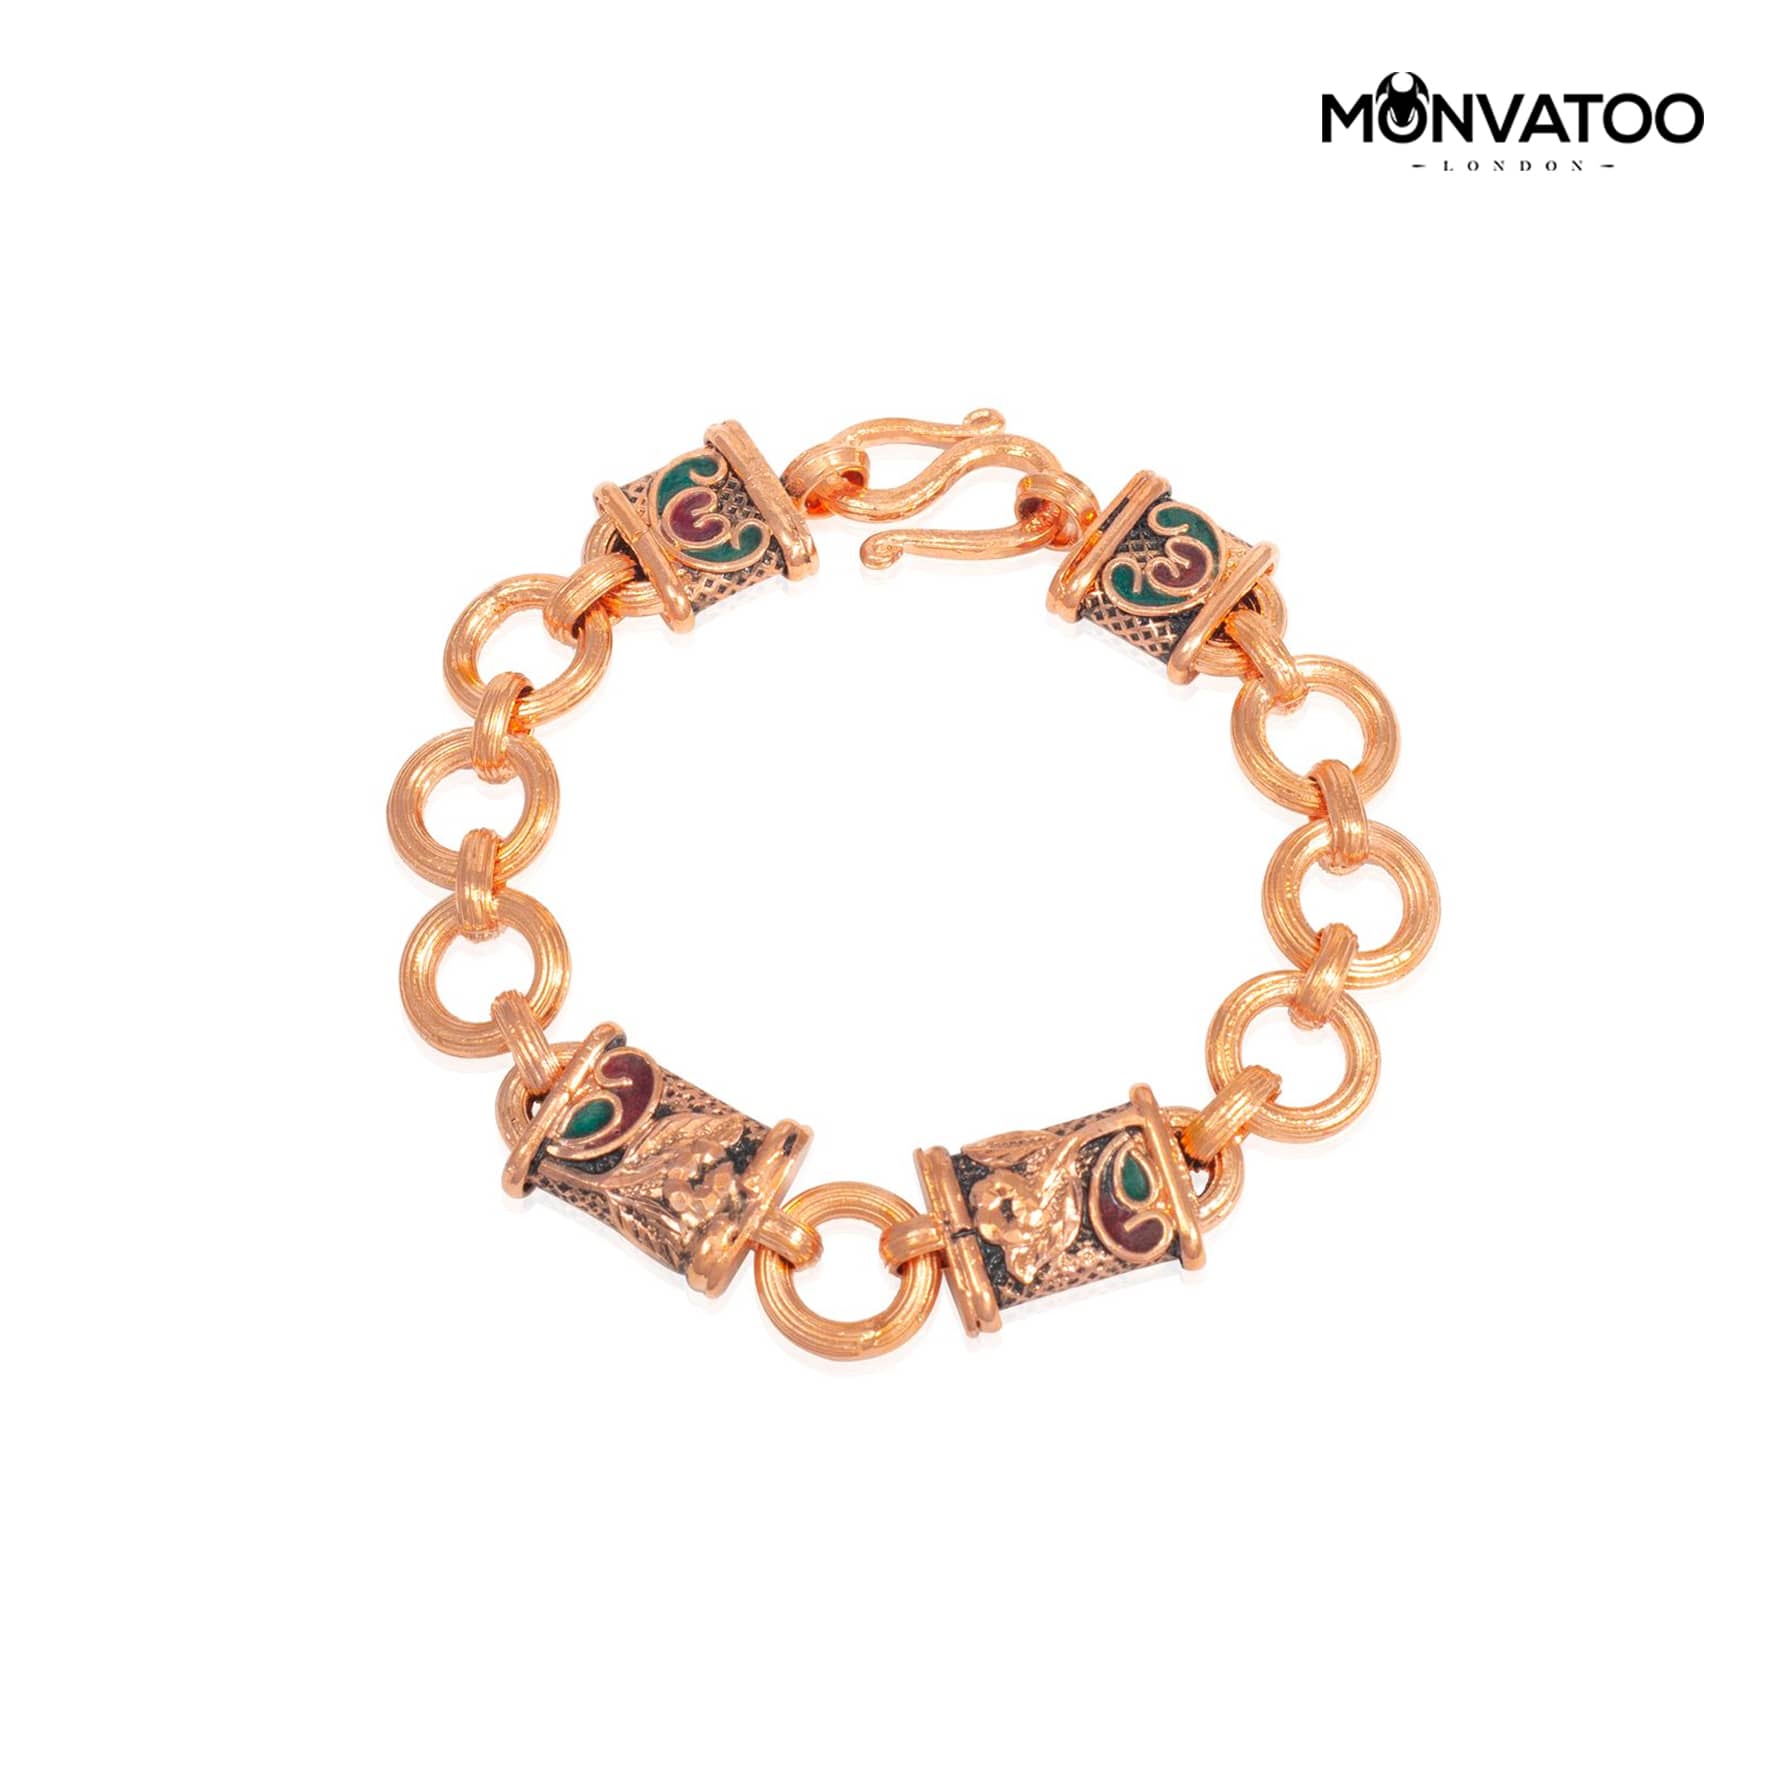 Pink Gold Forget-Me-Not Padlock Chain Bracelet by MONVATOO London